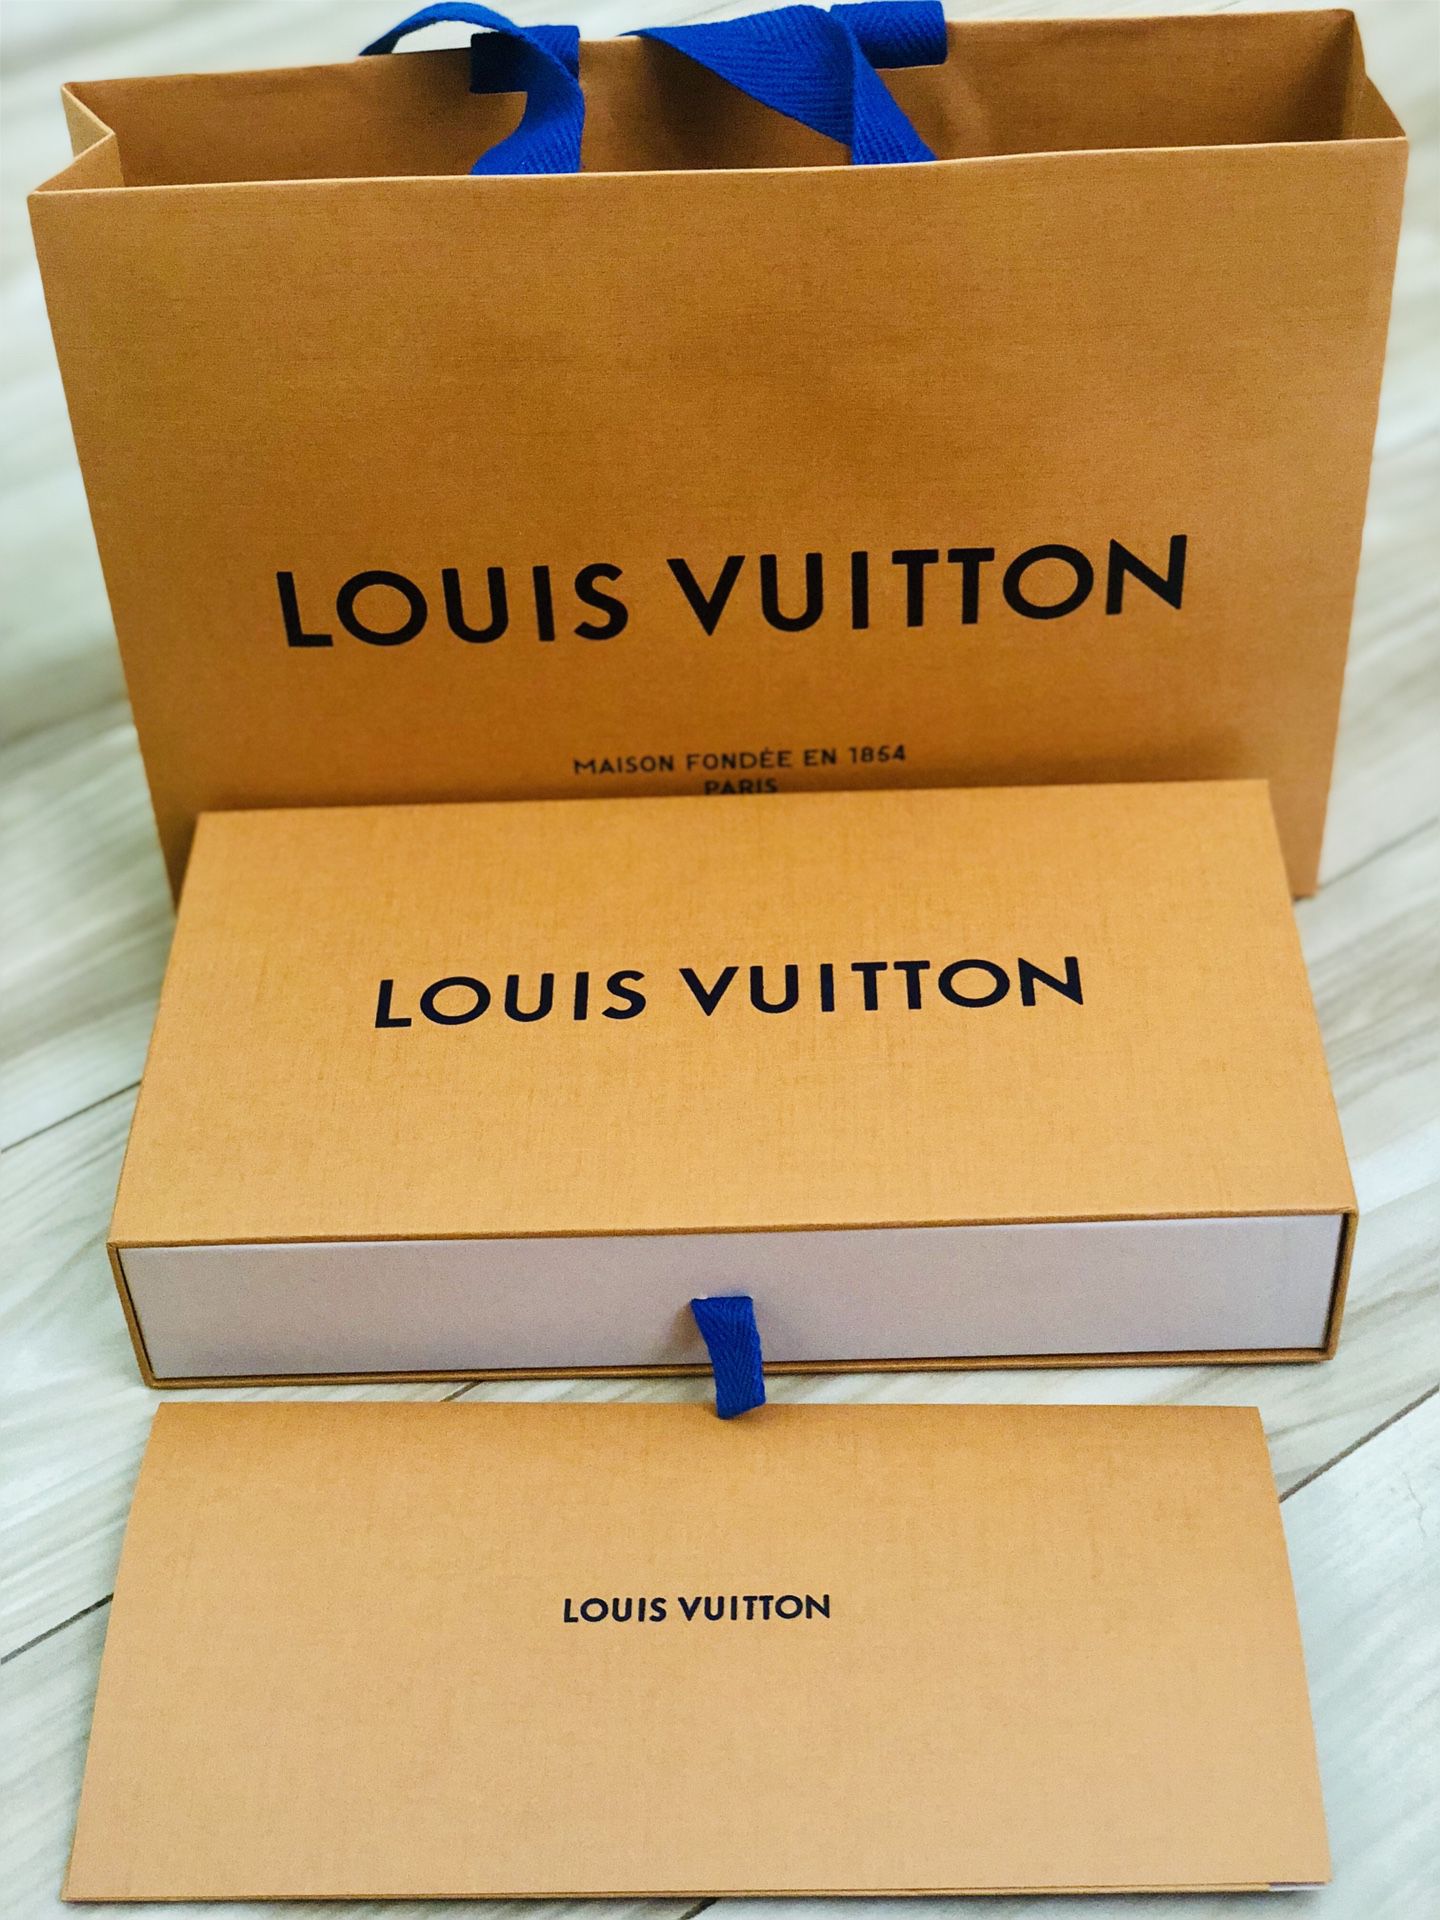 Louis Vuitton gift box set ( an empty bag and a box) The box fits my LV wallet . It’s 7.7*3.6*0.6 inches